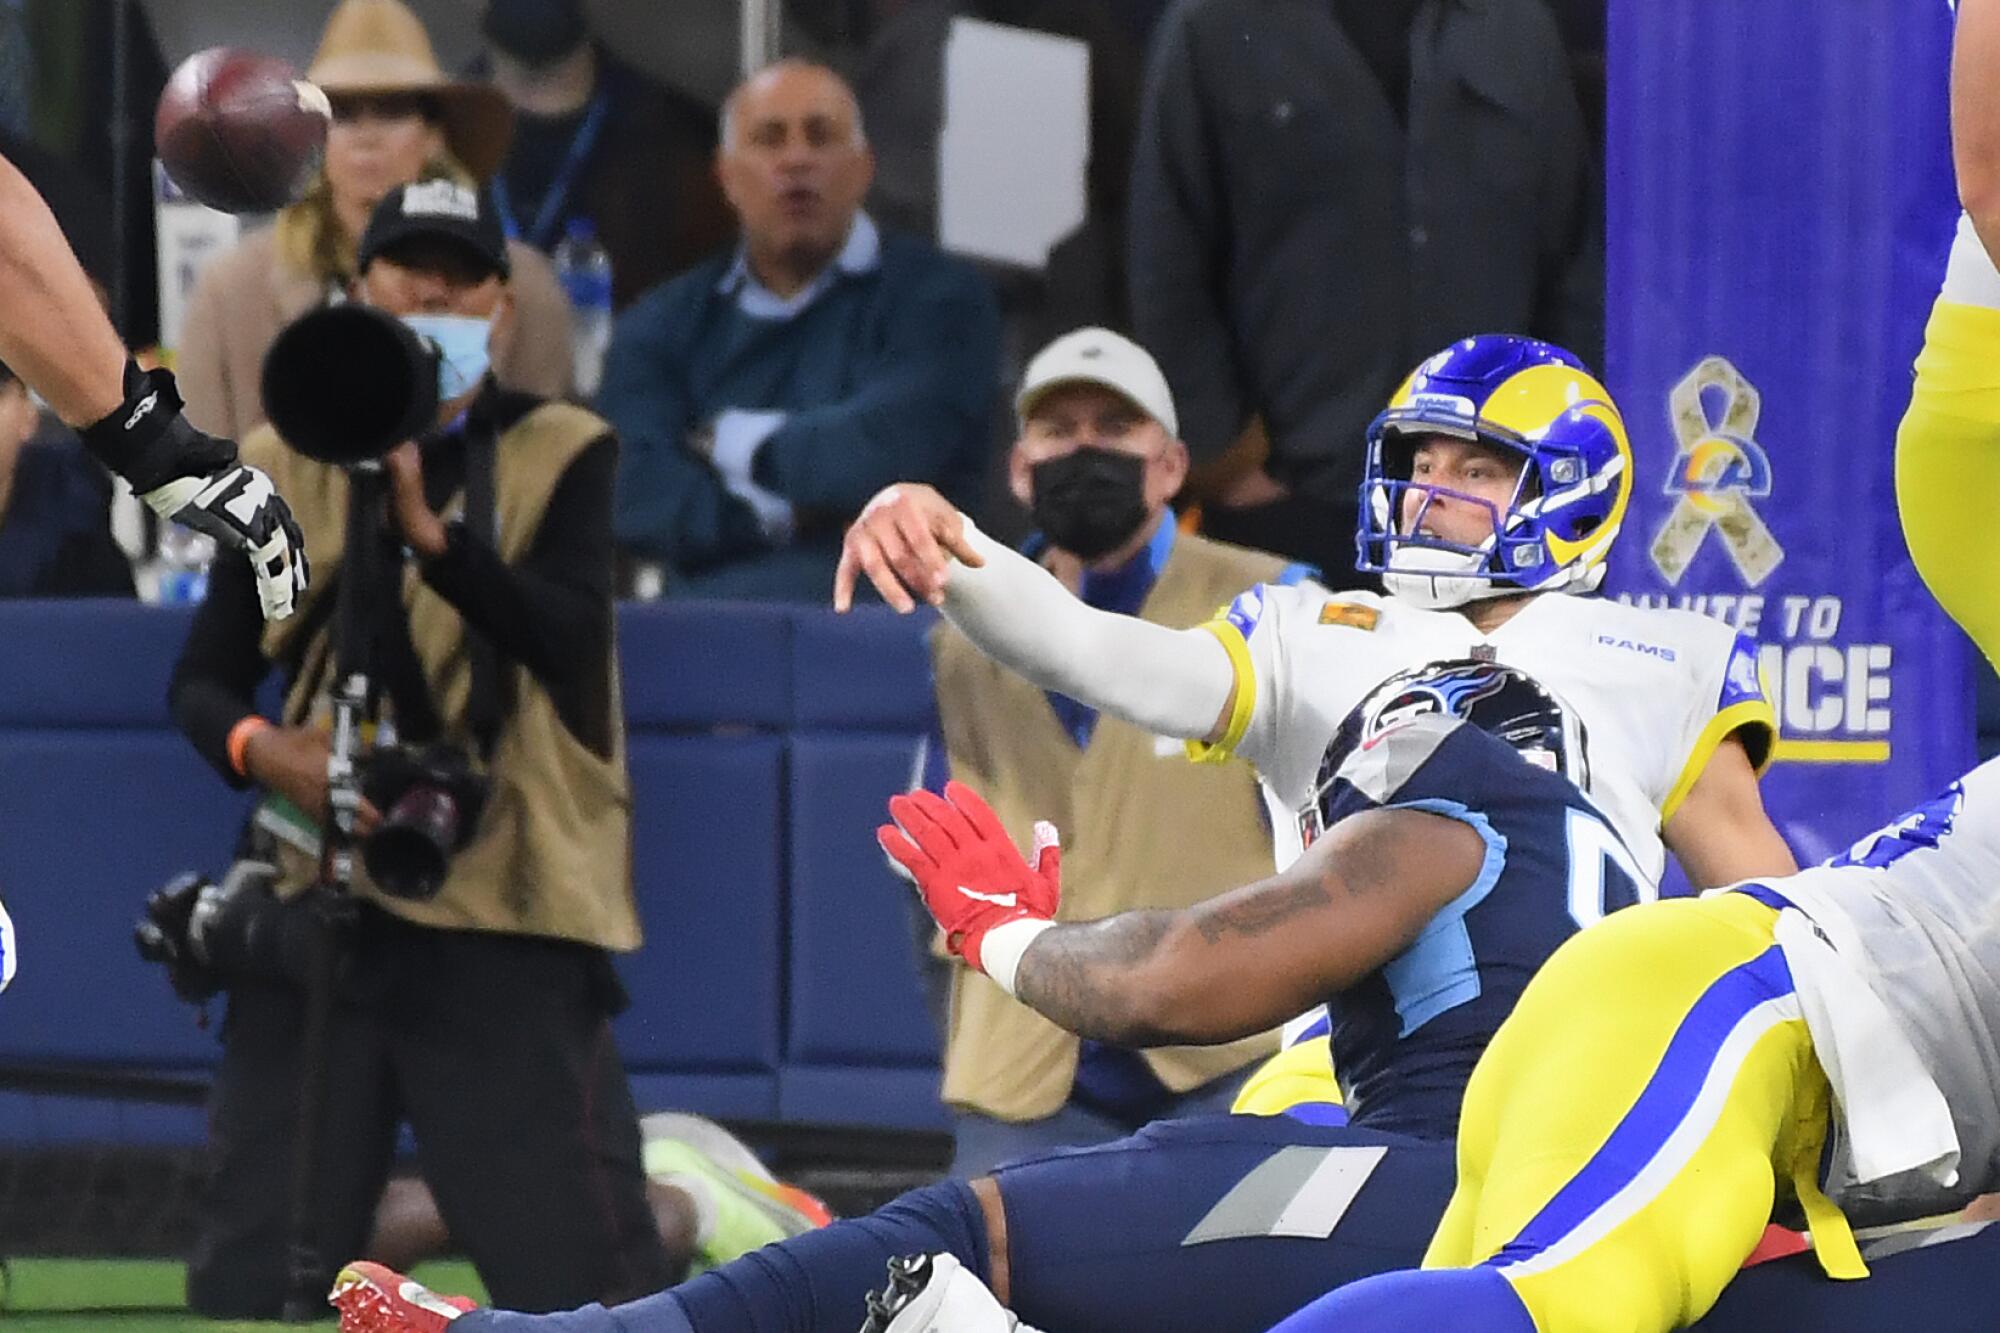 Rams quarterback Matthew Stafford throws an interception just before being brought down in the end zone.